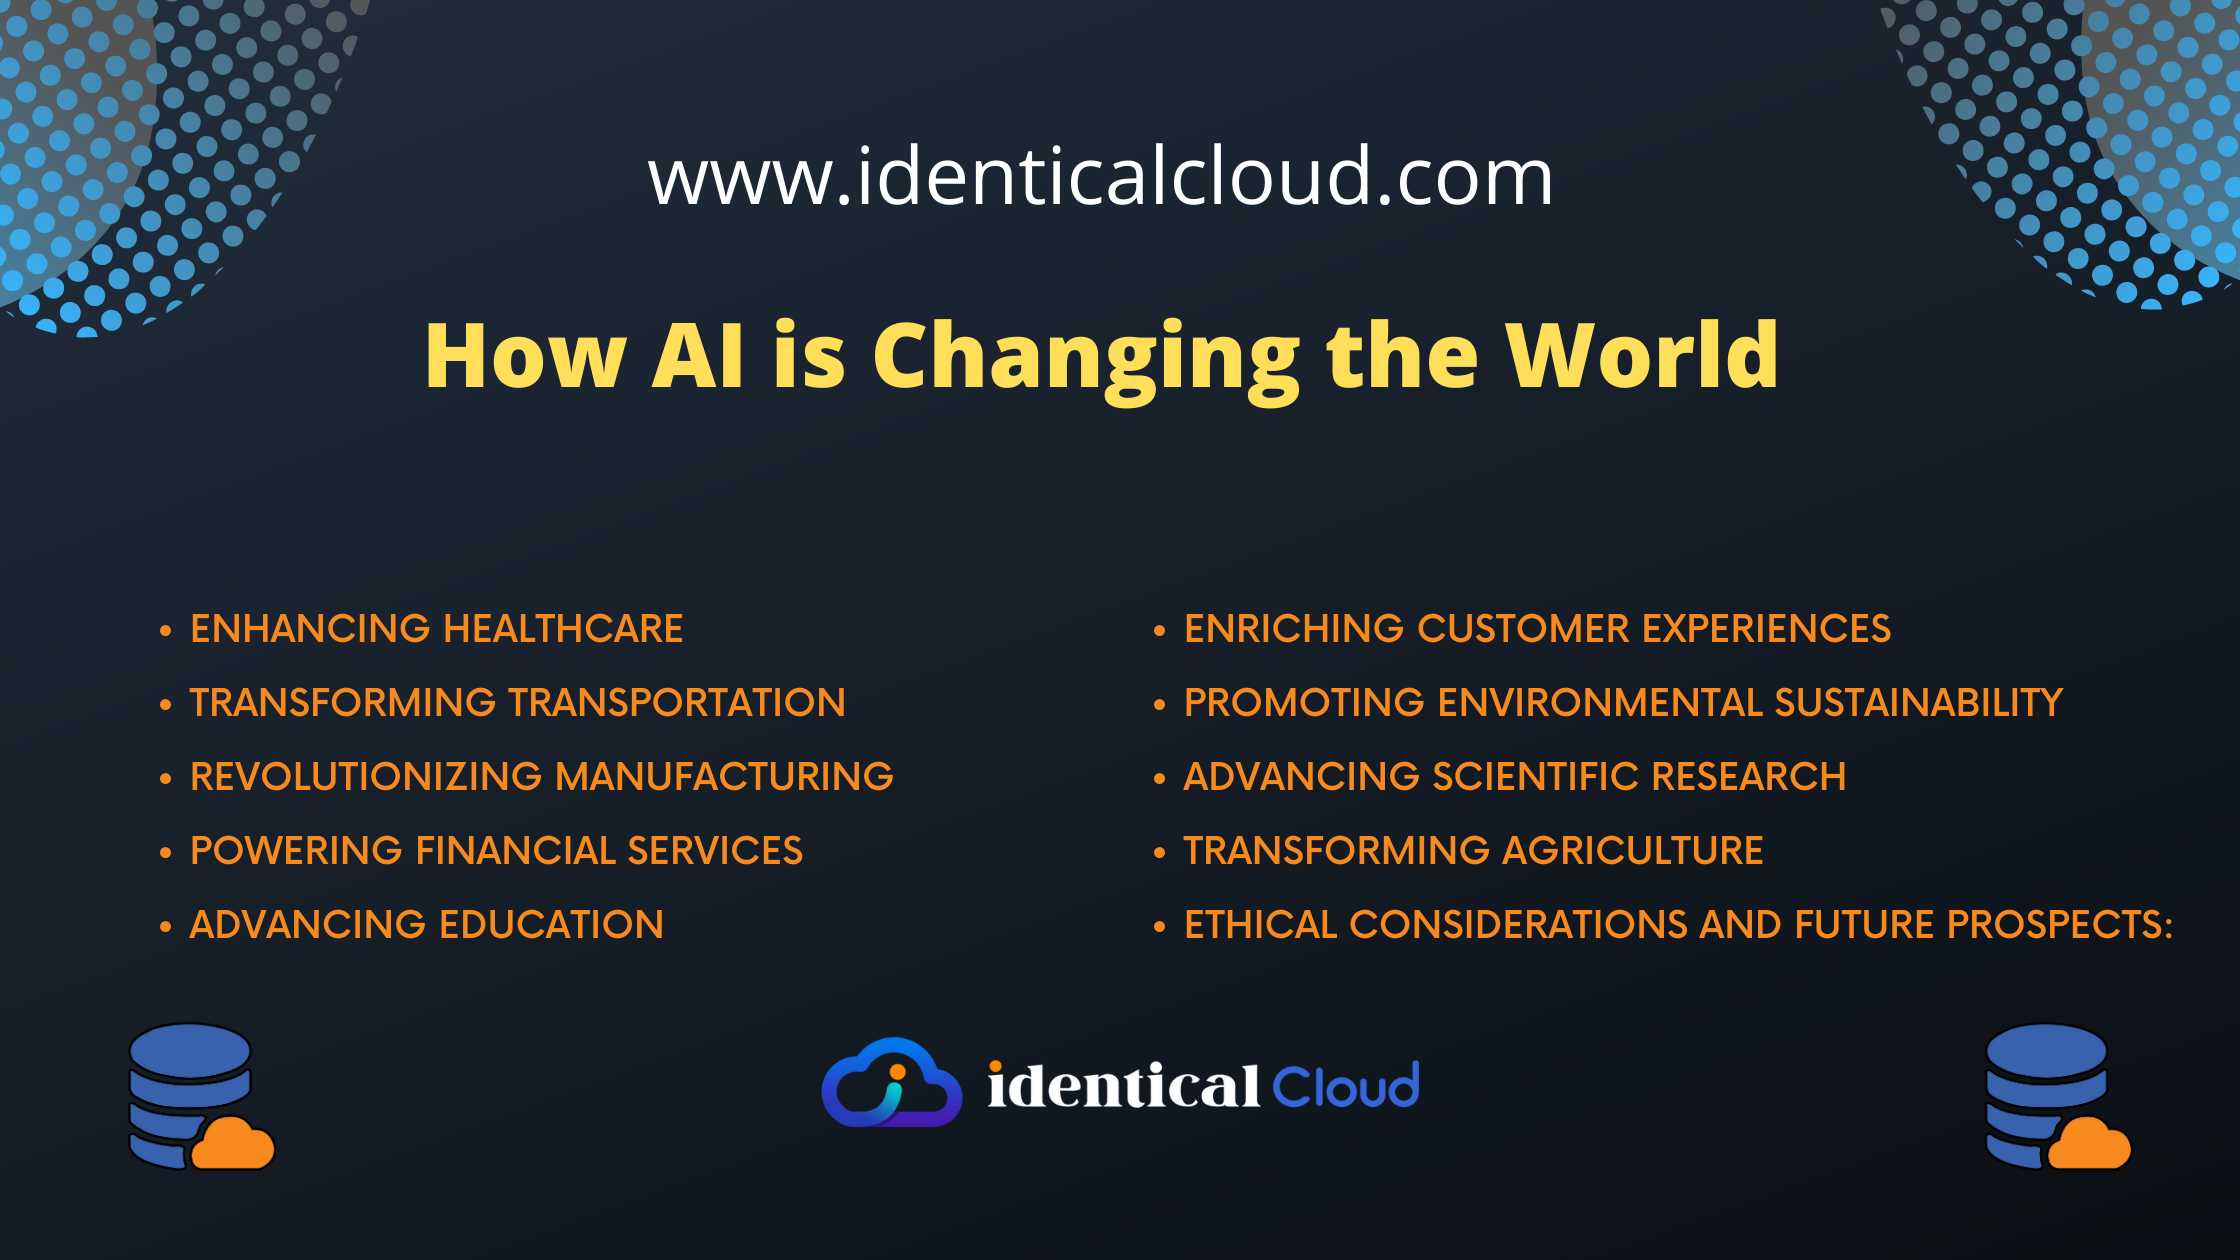 How AI is Changing the World - identicalcloud.com